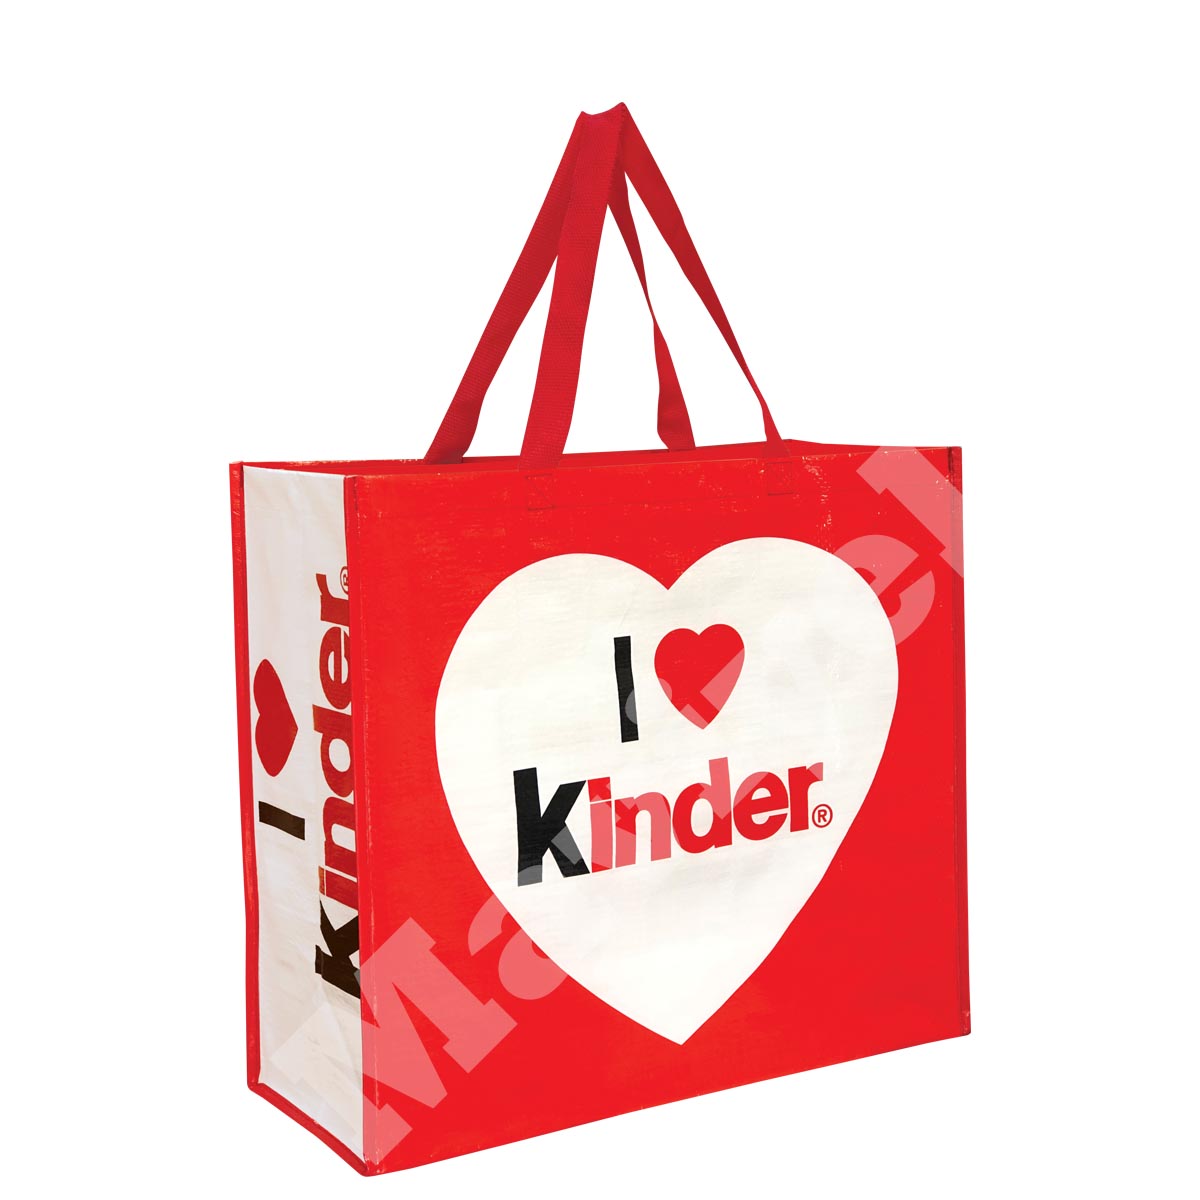 PP WOVEN BAGS – KINDER